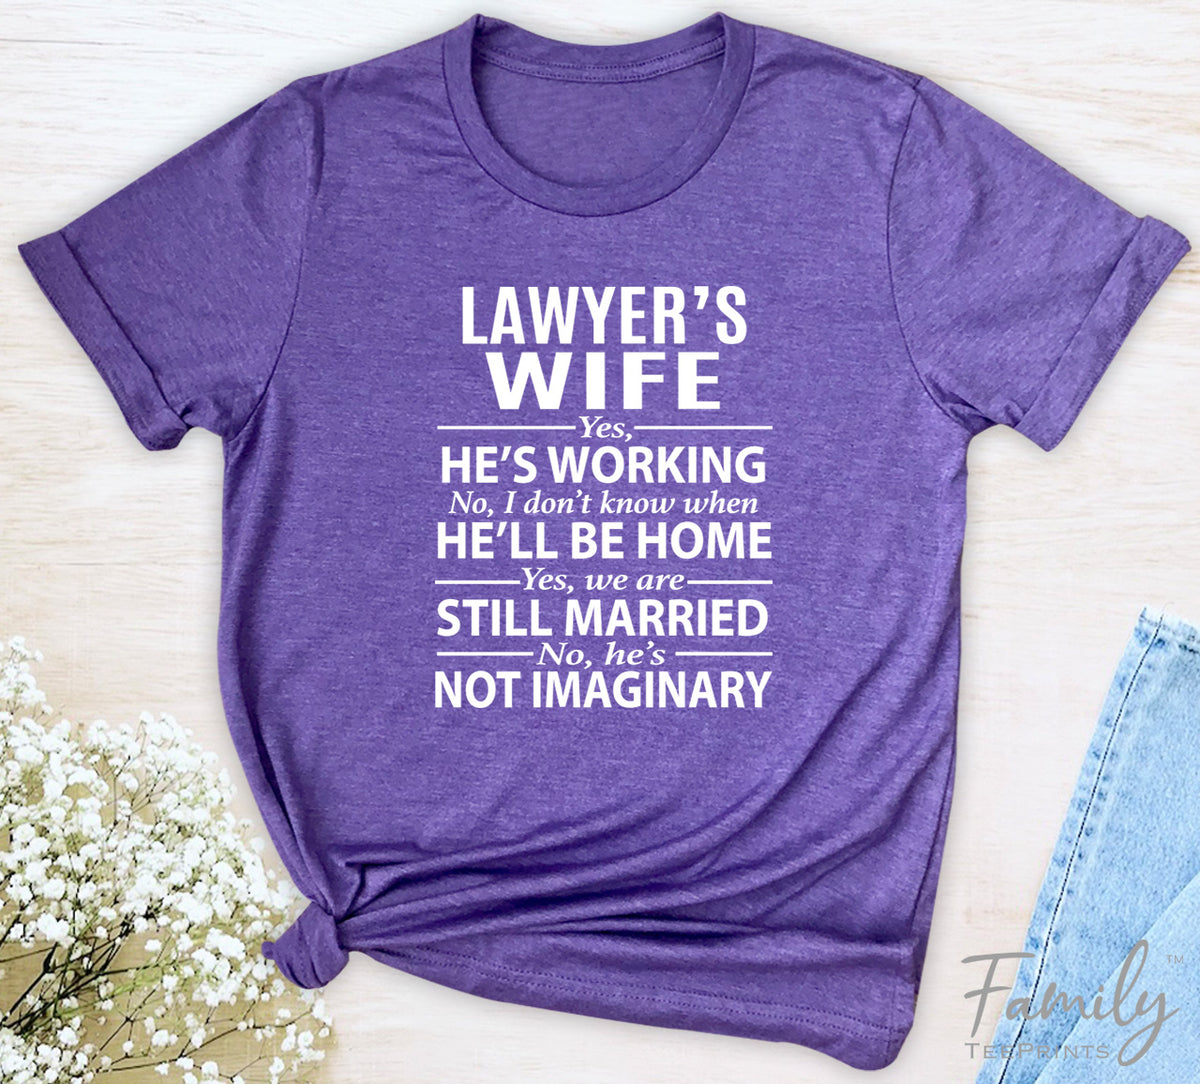 Lawyer's Wife Yes, He's Working - Unisex T-shirt - Lawyer's Wife Shirt - Gift For Lawyer's Wife - familyteeprints